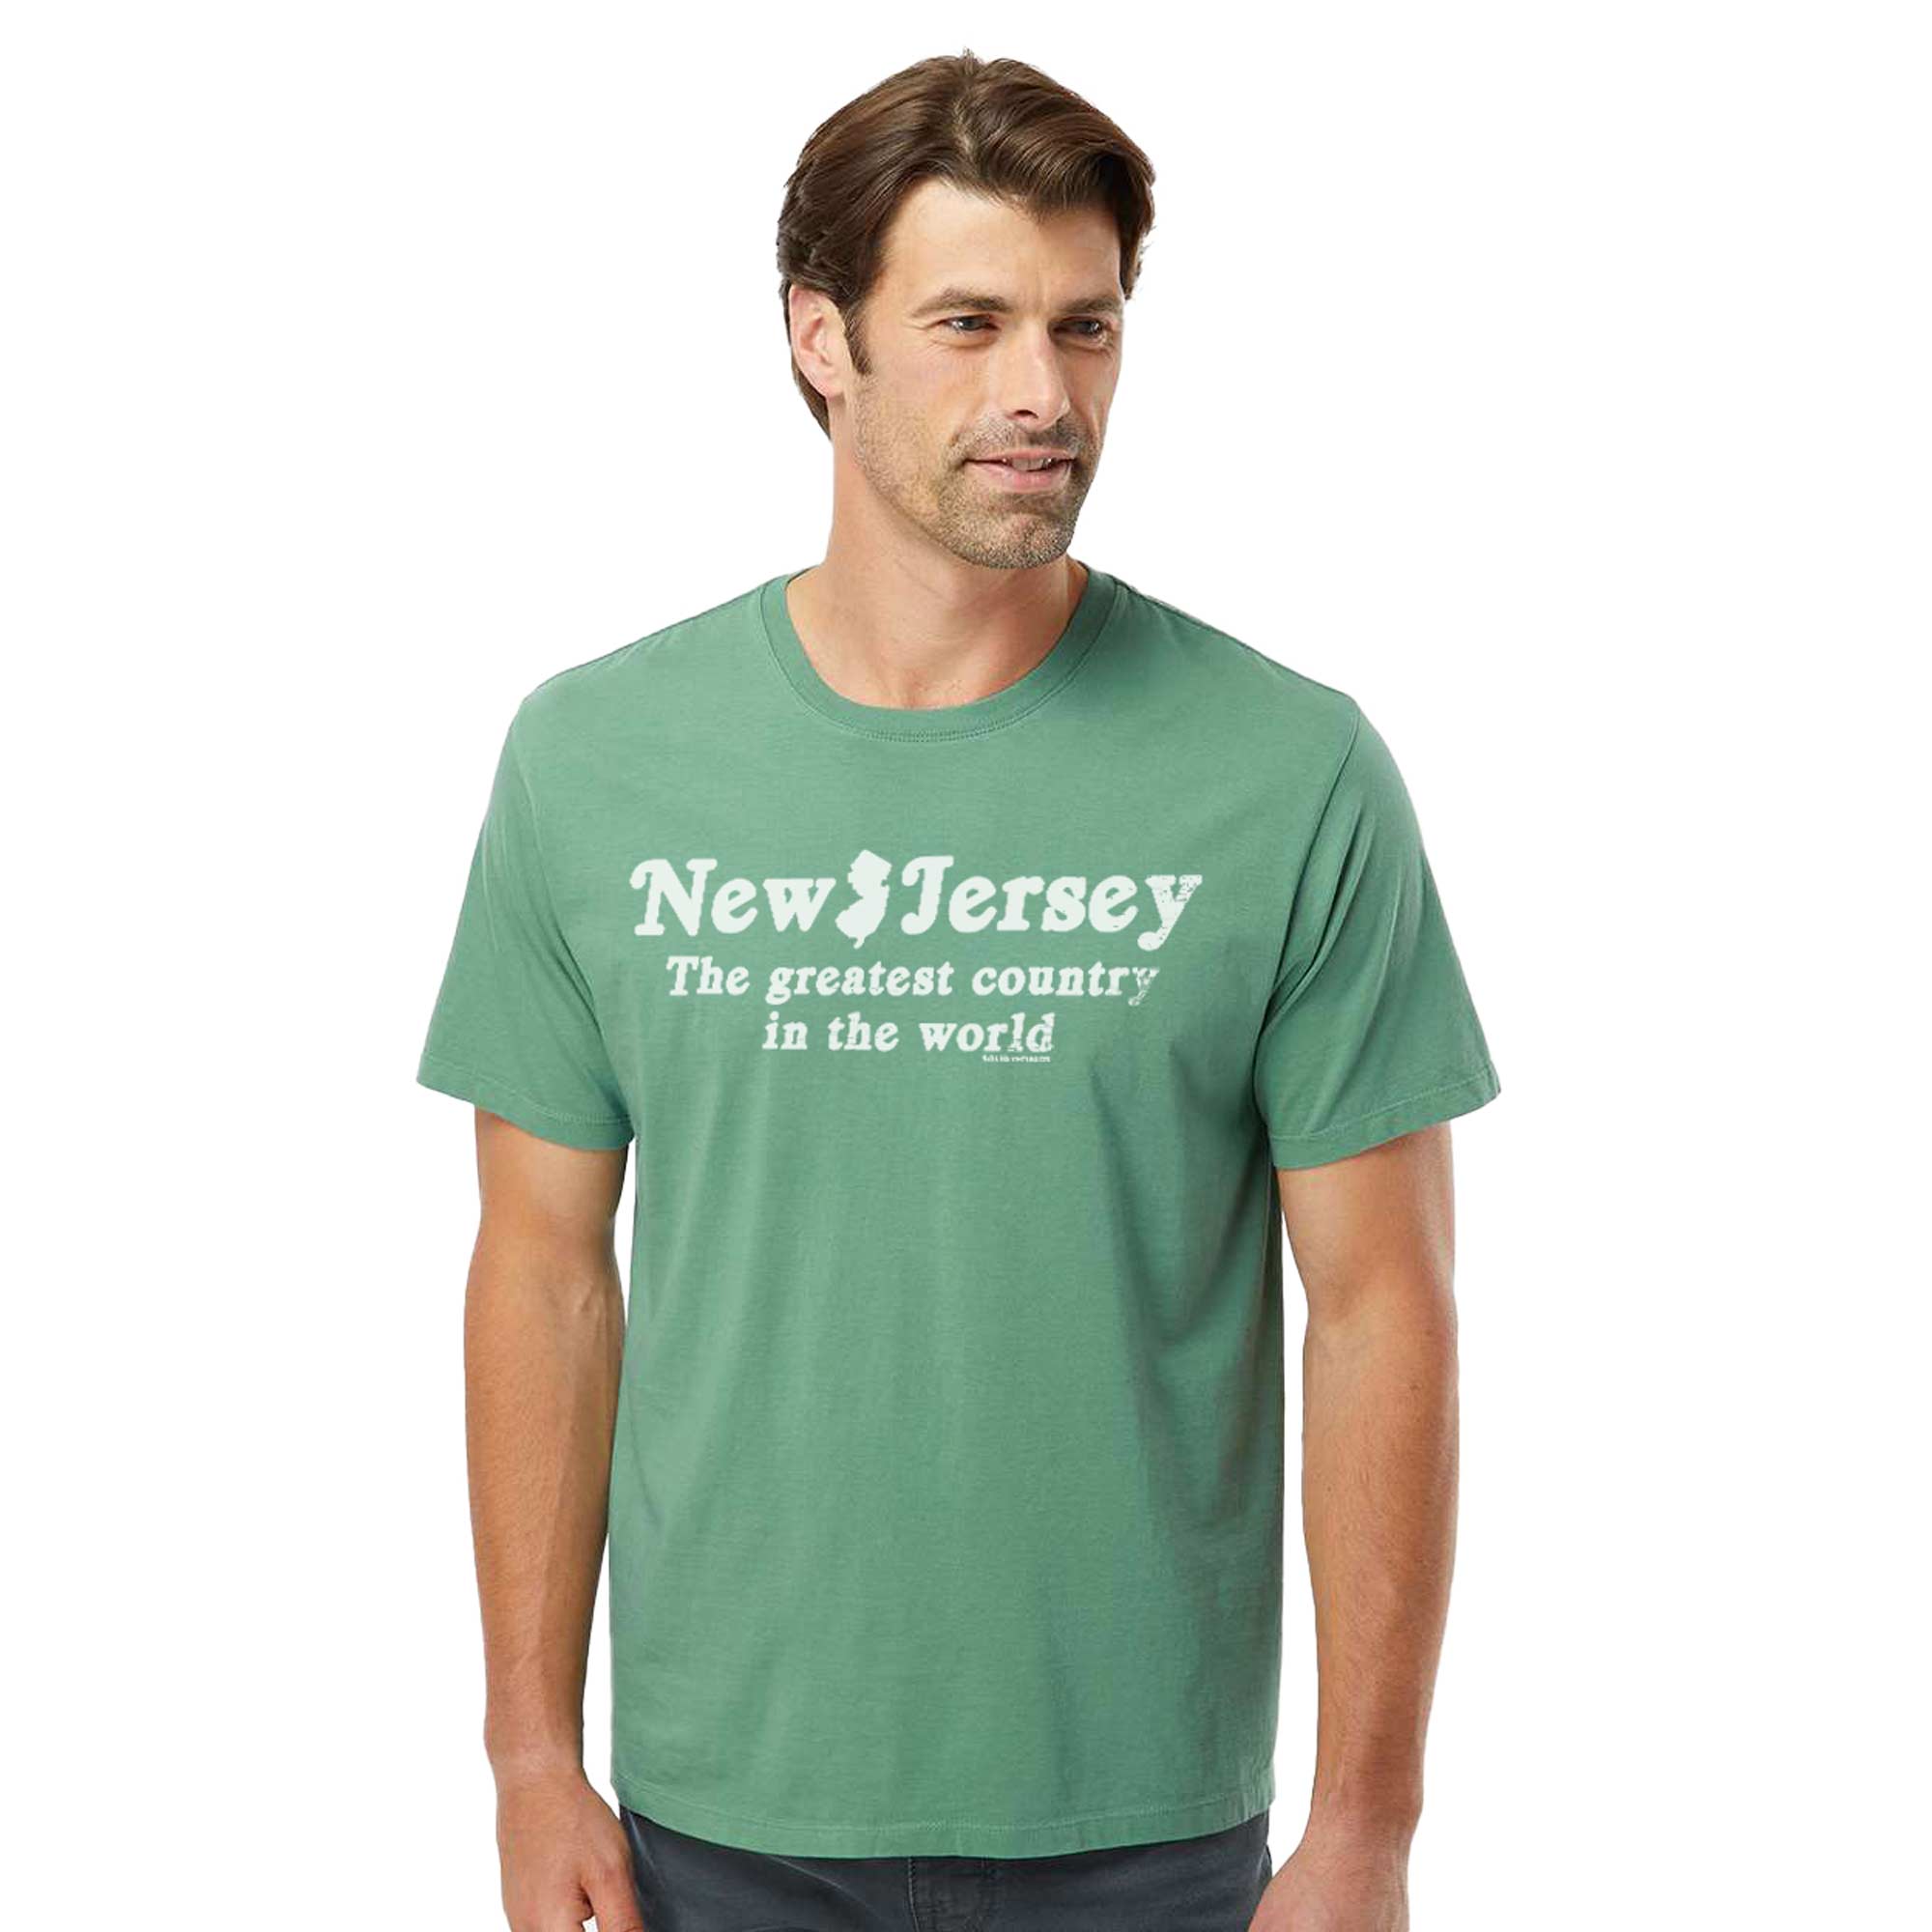 New Jersey The Greatest Country In The World Vintage Organic Cotton T-shirt | Funny Garden State  Tee | Solid Threads